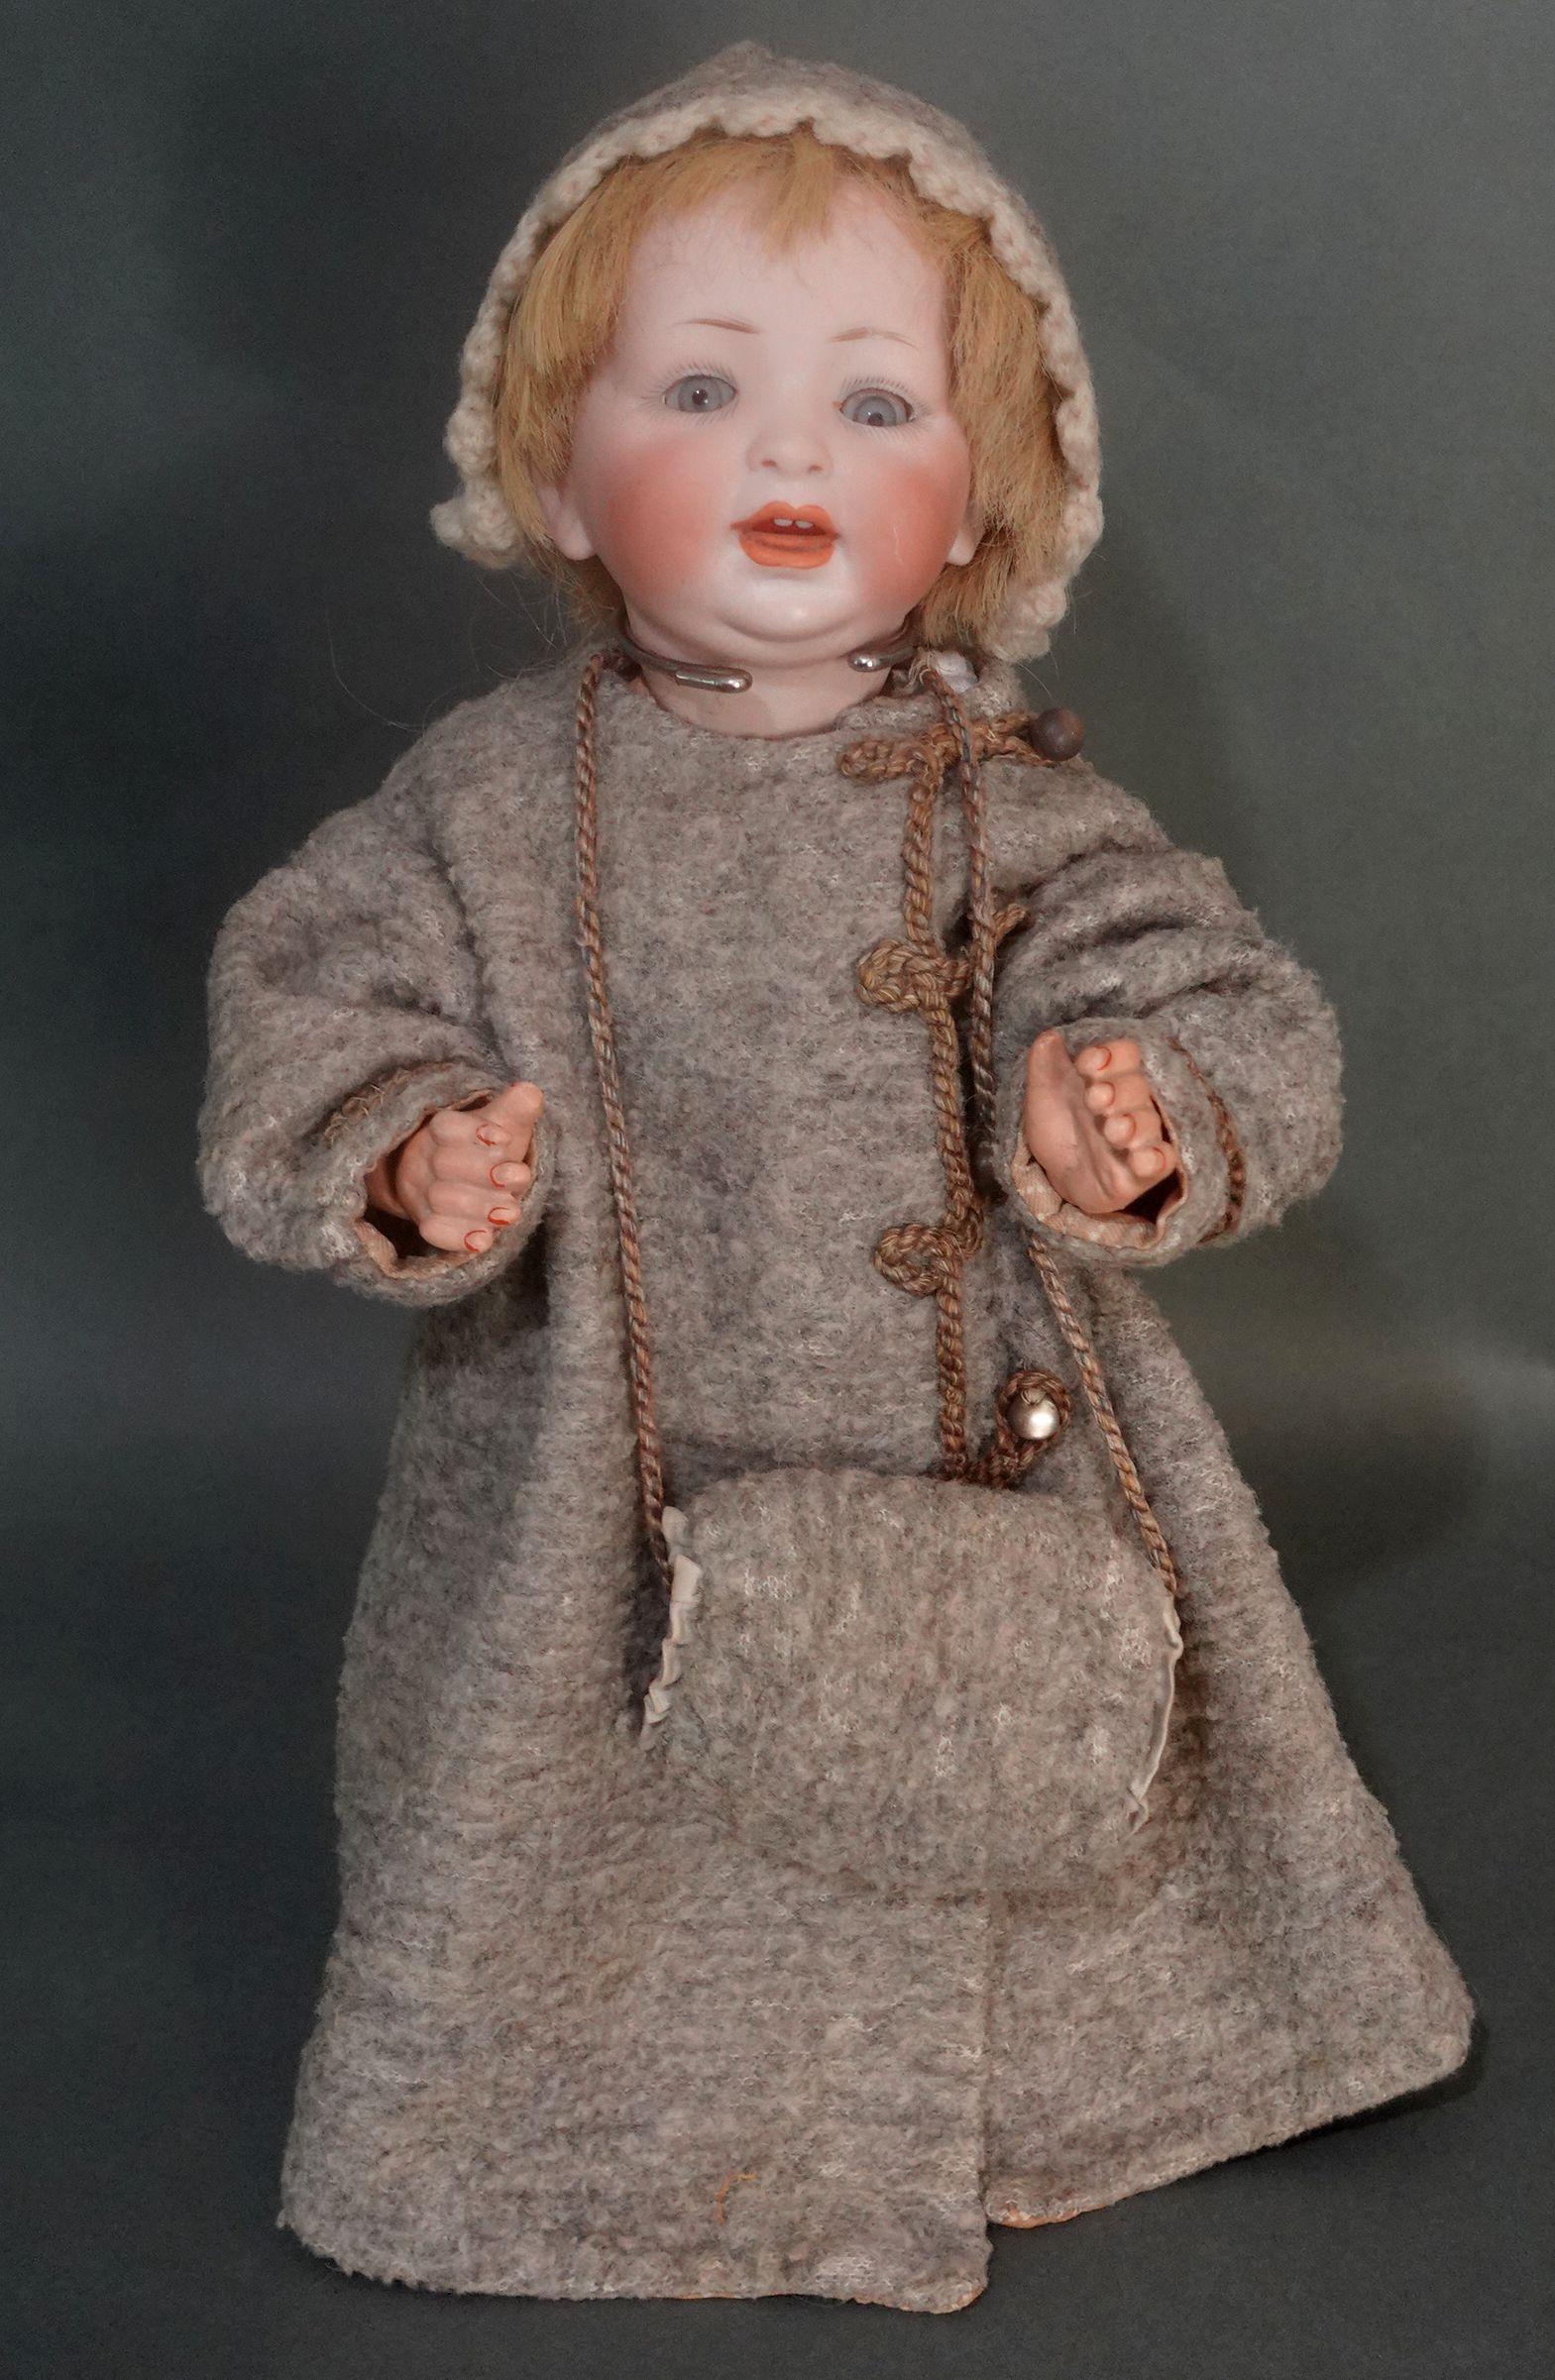 Antique Hertel Schwab baby doll. Measures approximately 13.5 inches in height. Beautiful blue glass sleep eyes with painted upper and lower lashes. Painted eyebrows. Open mouth with two upper teeth and a tongue.  The head is incised with: Made in